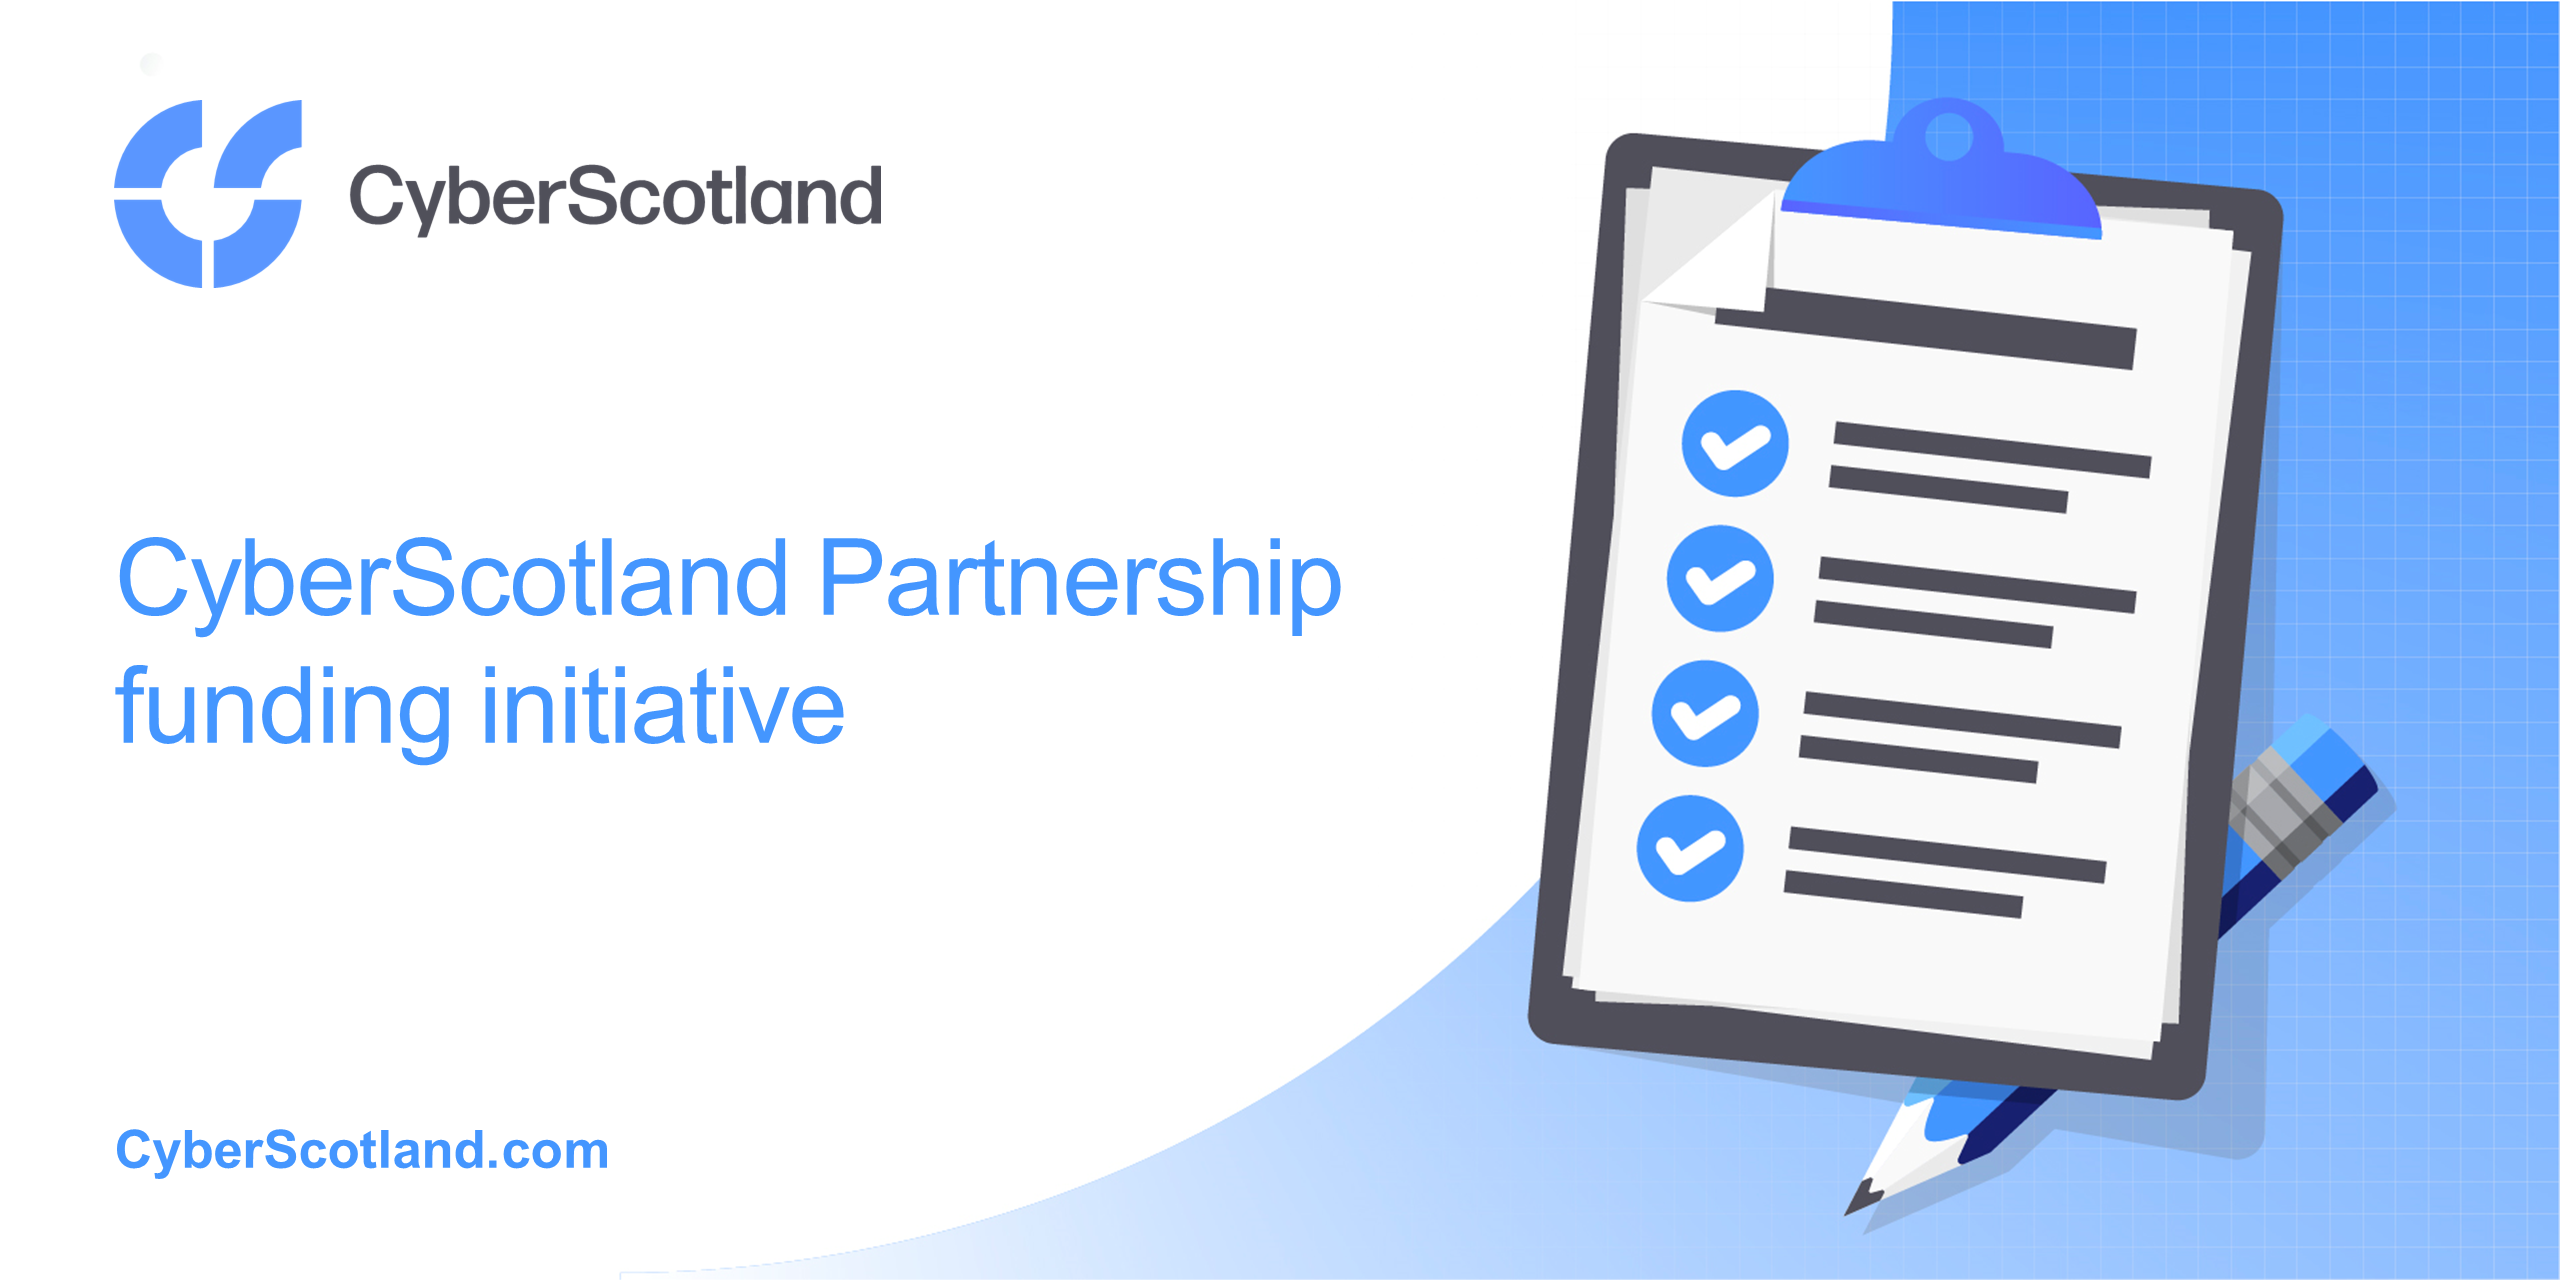 Proposals announced for CyberScotland Partnership funding initiative